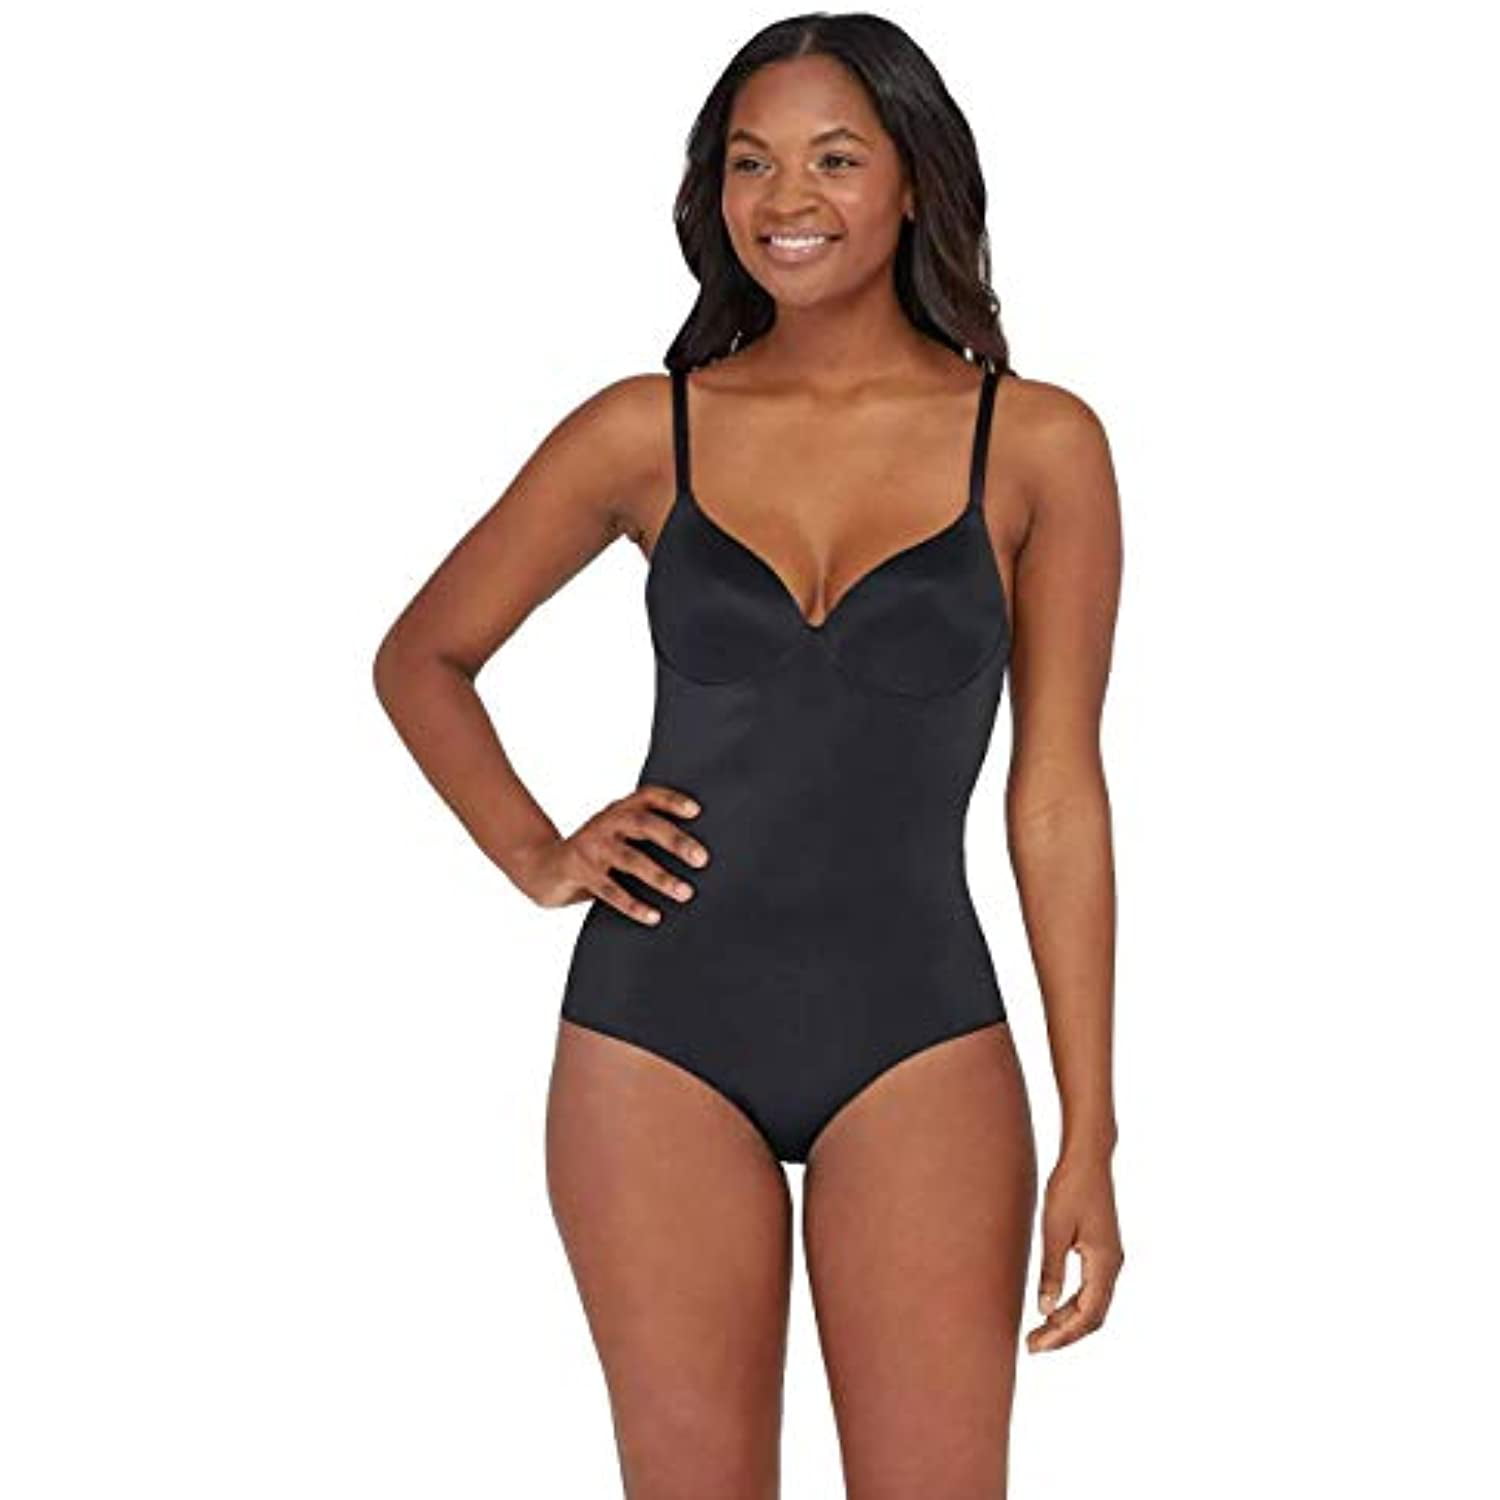 Assets by Spanx Women's Shaping Micro Low Back Cupped Bodysuit Shapewear -  (Black, Large)